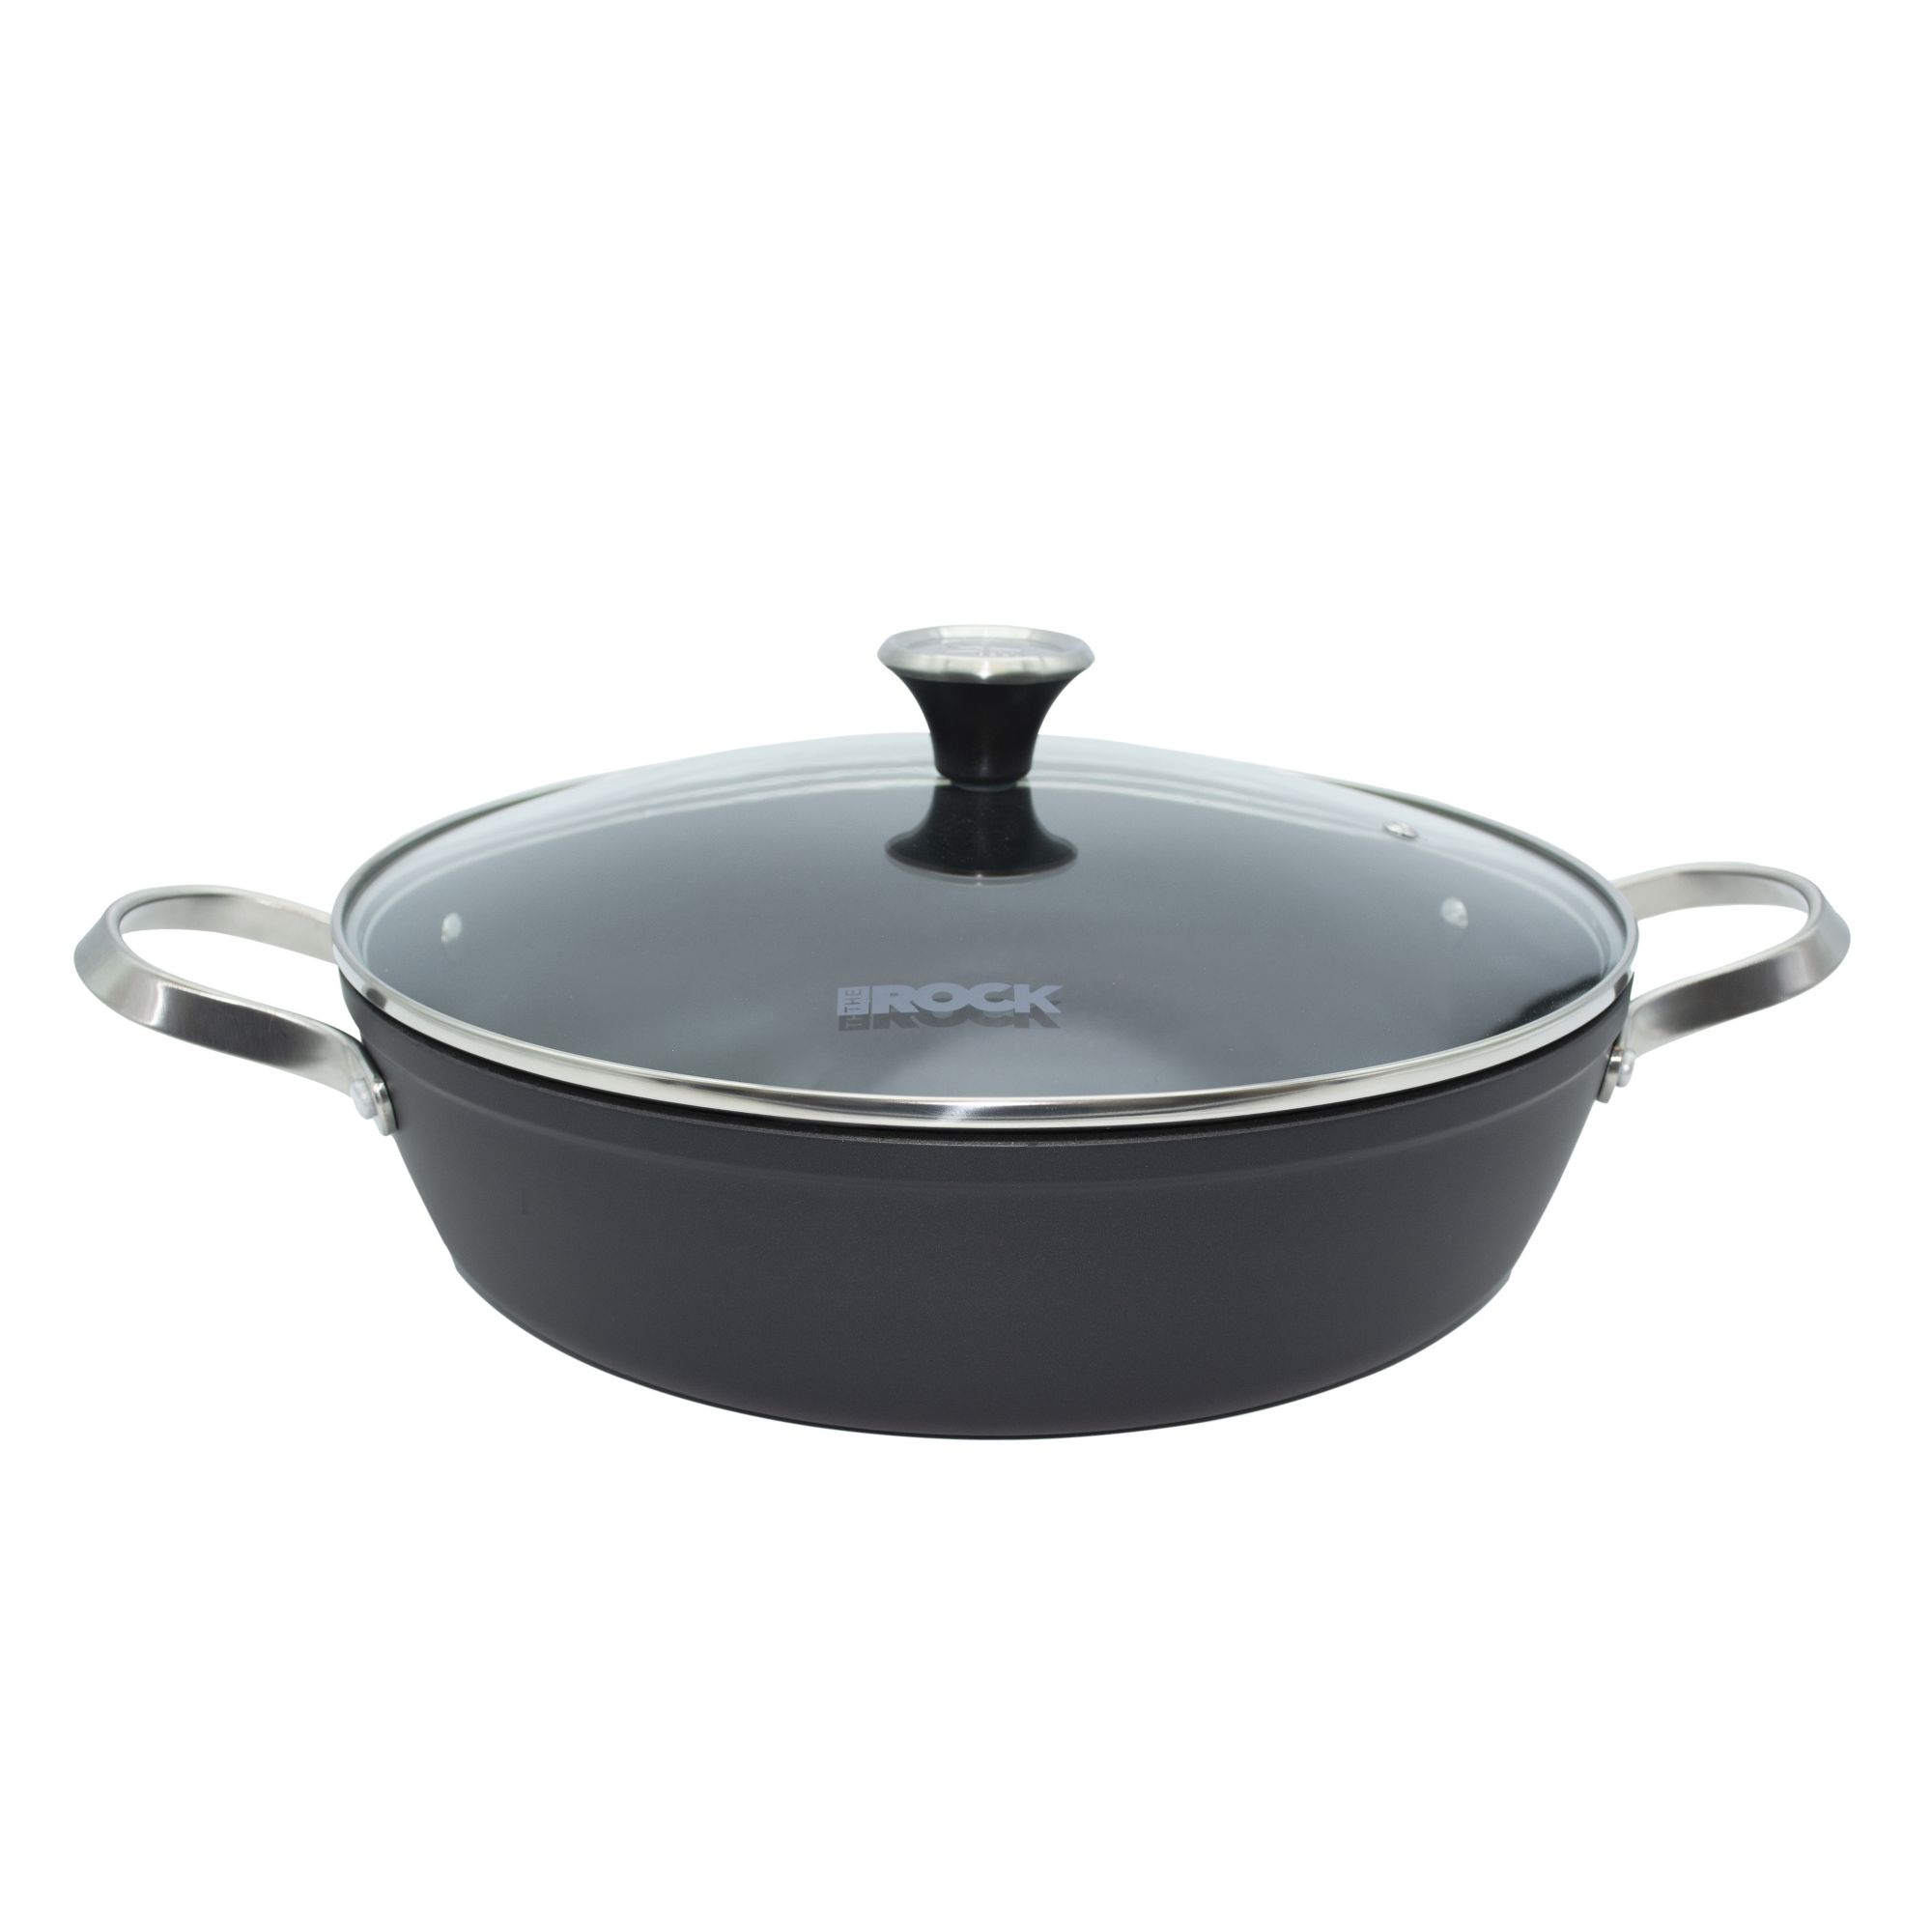 The Rock by Starfrit 9 Deep Fry Pan & Dutch Oven with Lid